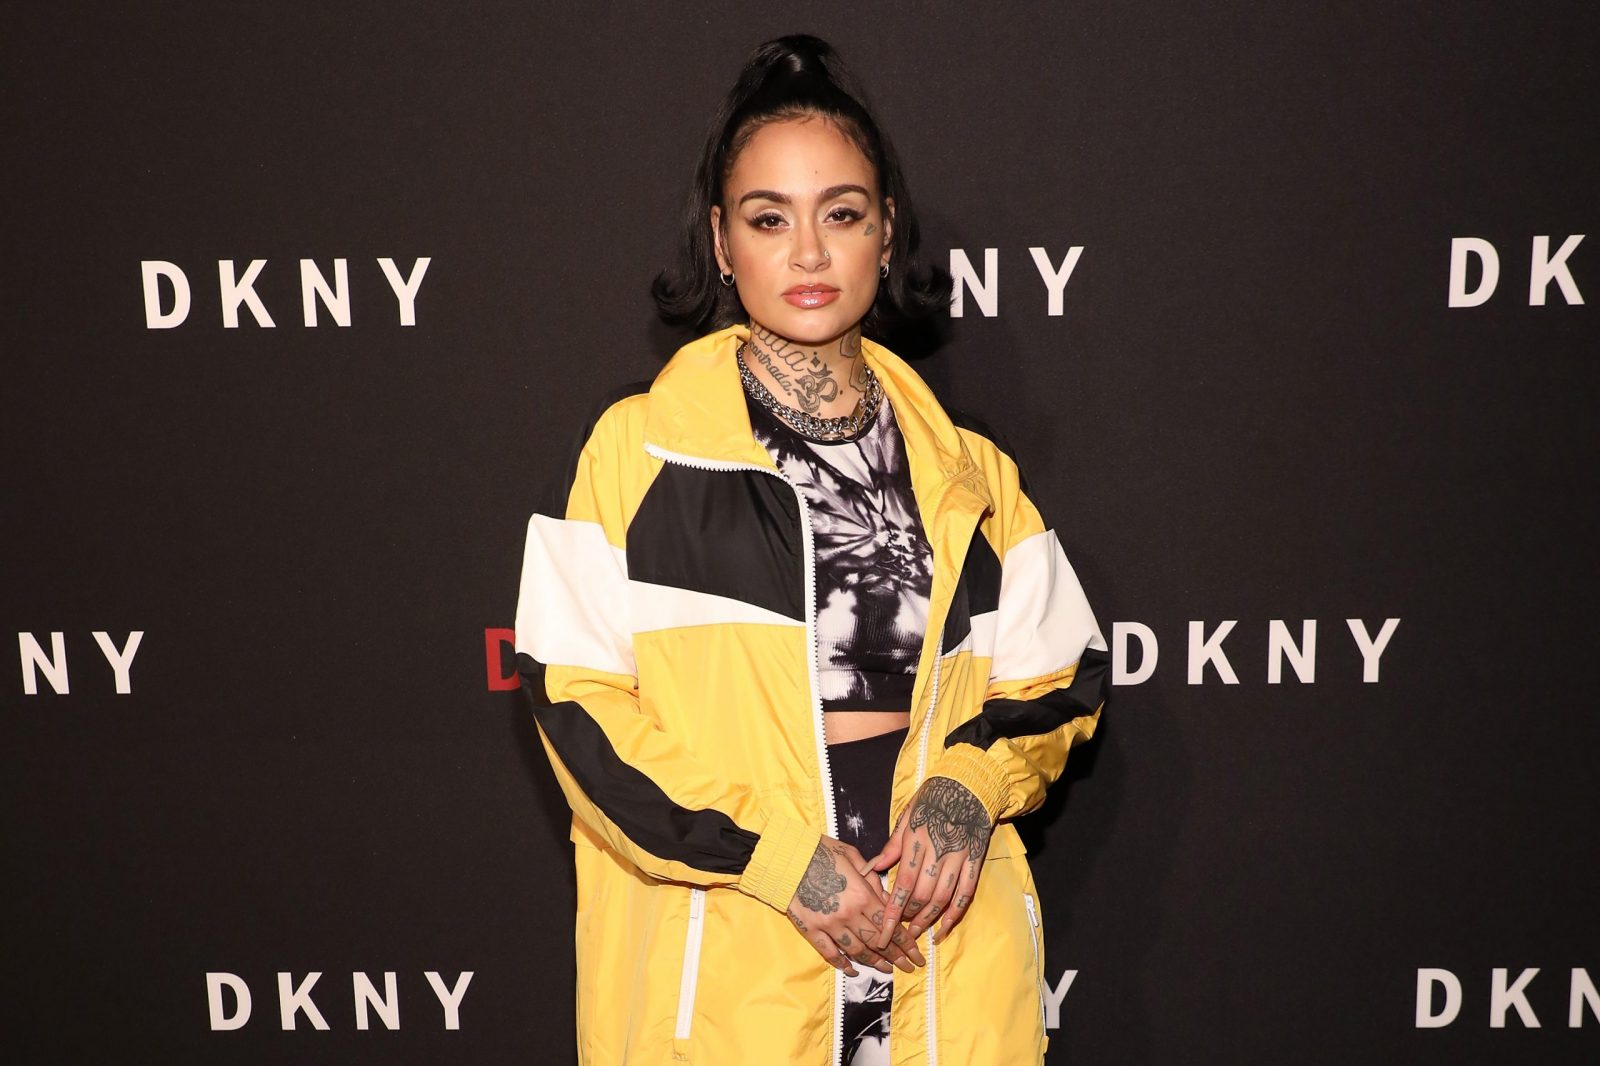 Kehlani Opens Up About Her Sexuality On Instagram Live